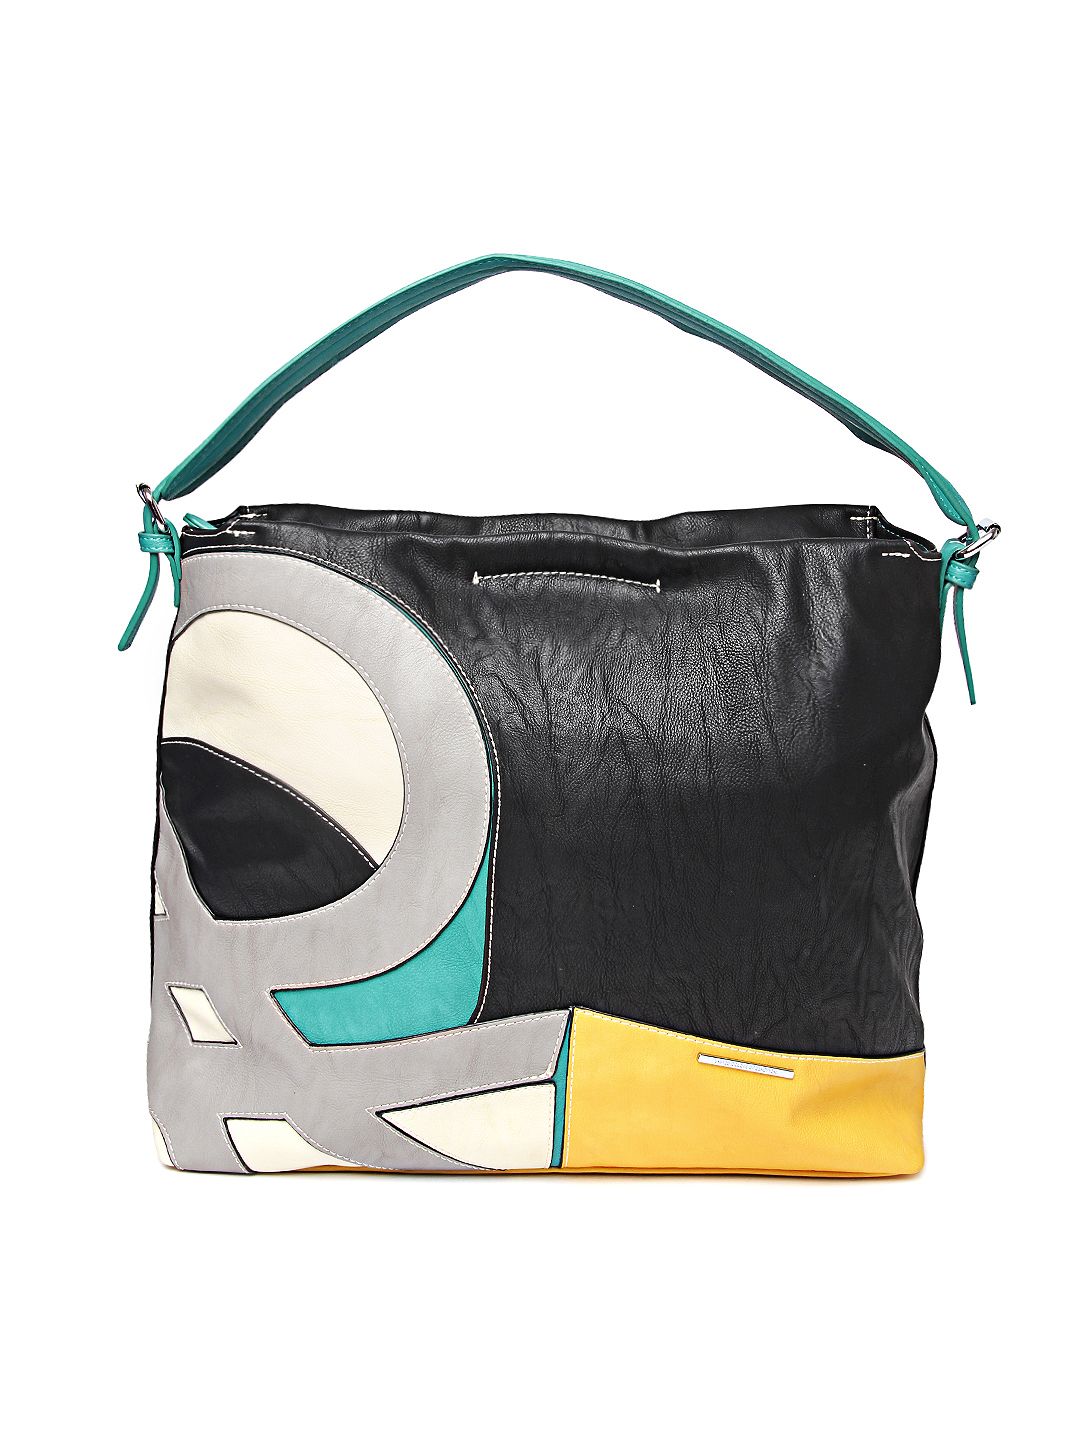 Buy United Colors Of Benetton Women Black Tote Bag - Tote Bags for Women | Myntra